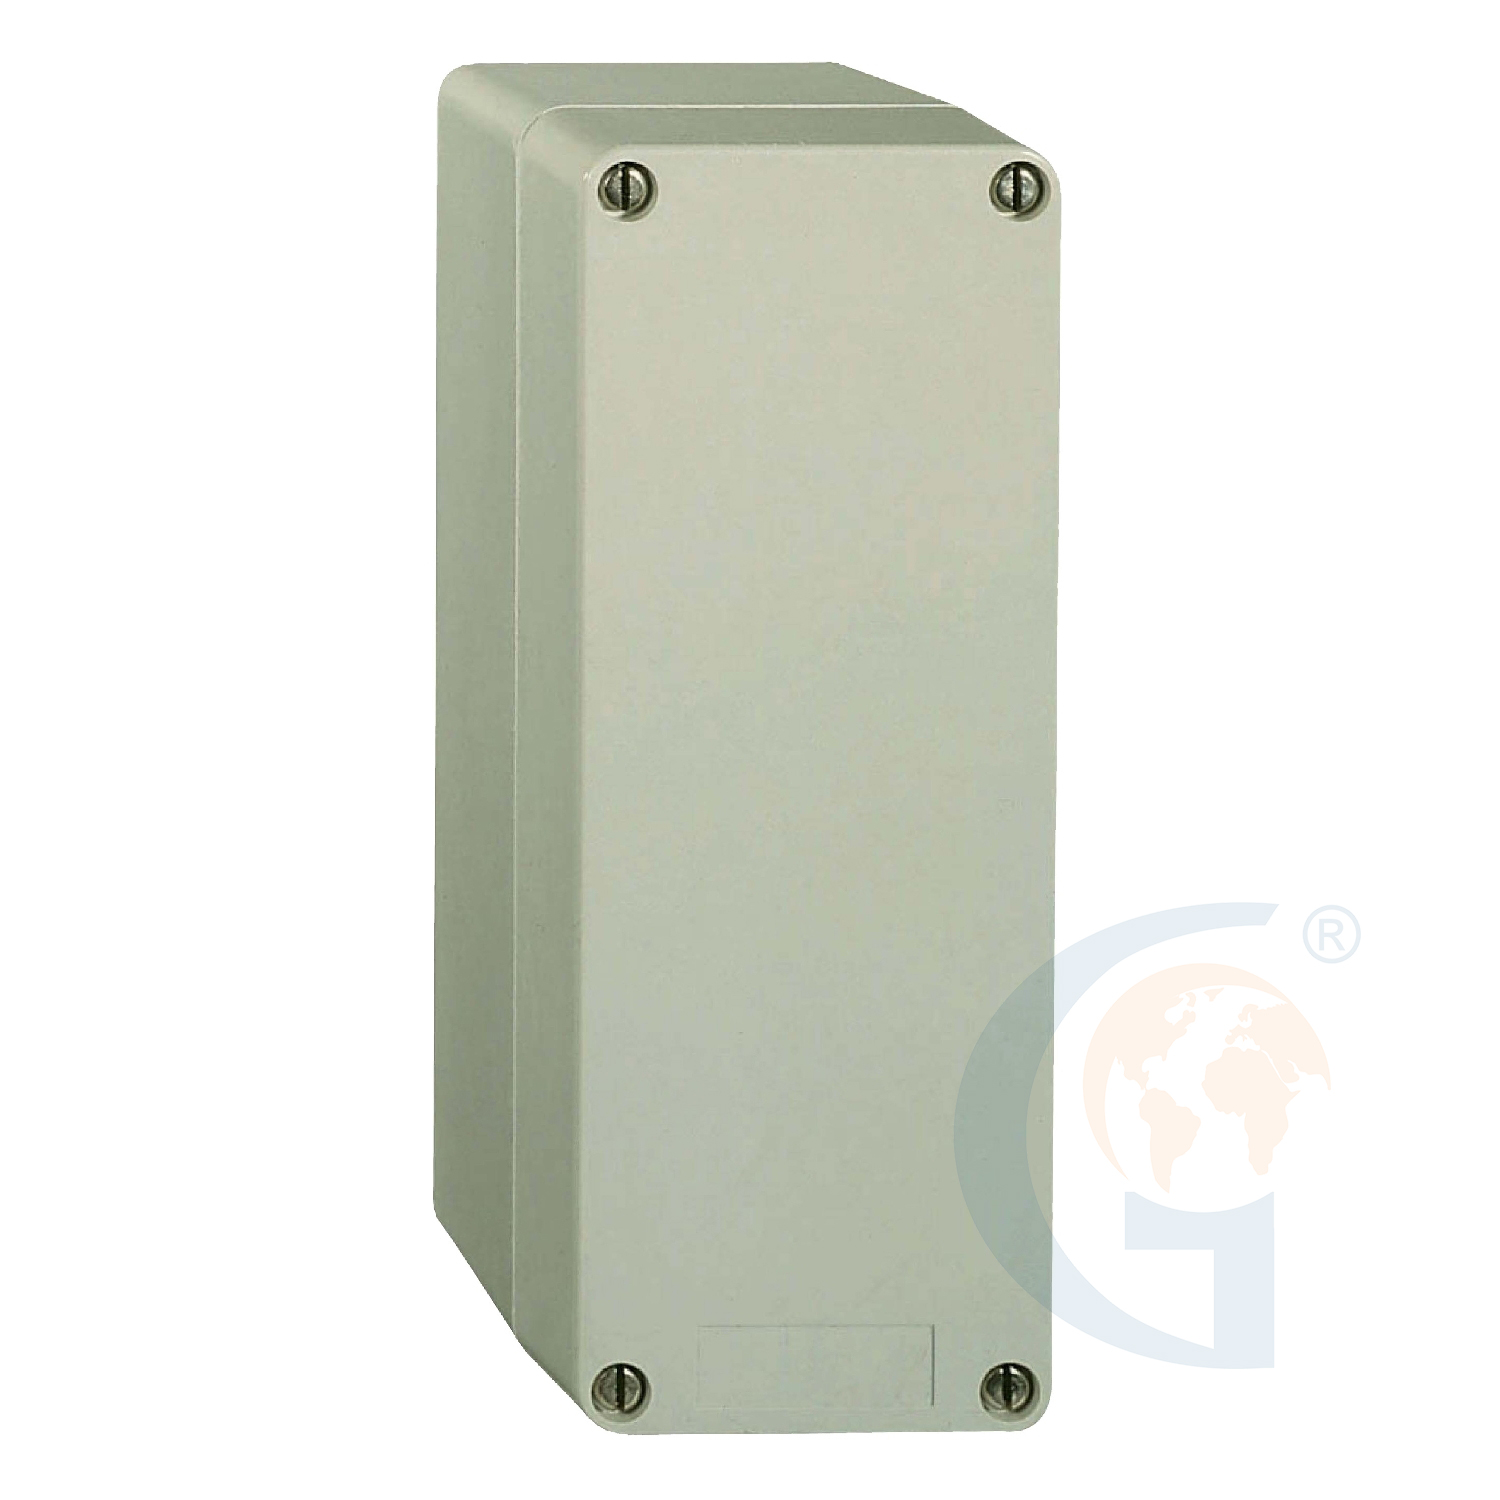 Schneider Electric XAPA2100 empty control station – XAP-A – plastic – without opening https://gesrepair.com/wp-content/uploads/2020/Schneider/Schneider_Electric_XAPA2100_.jpg